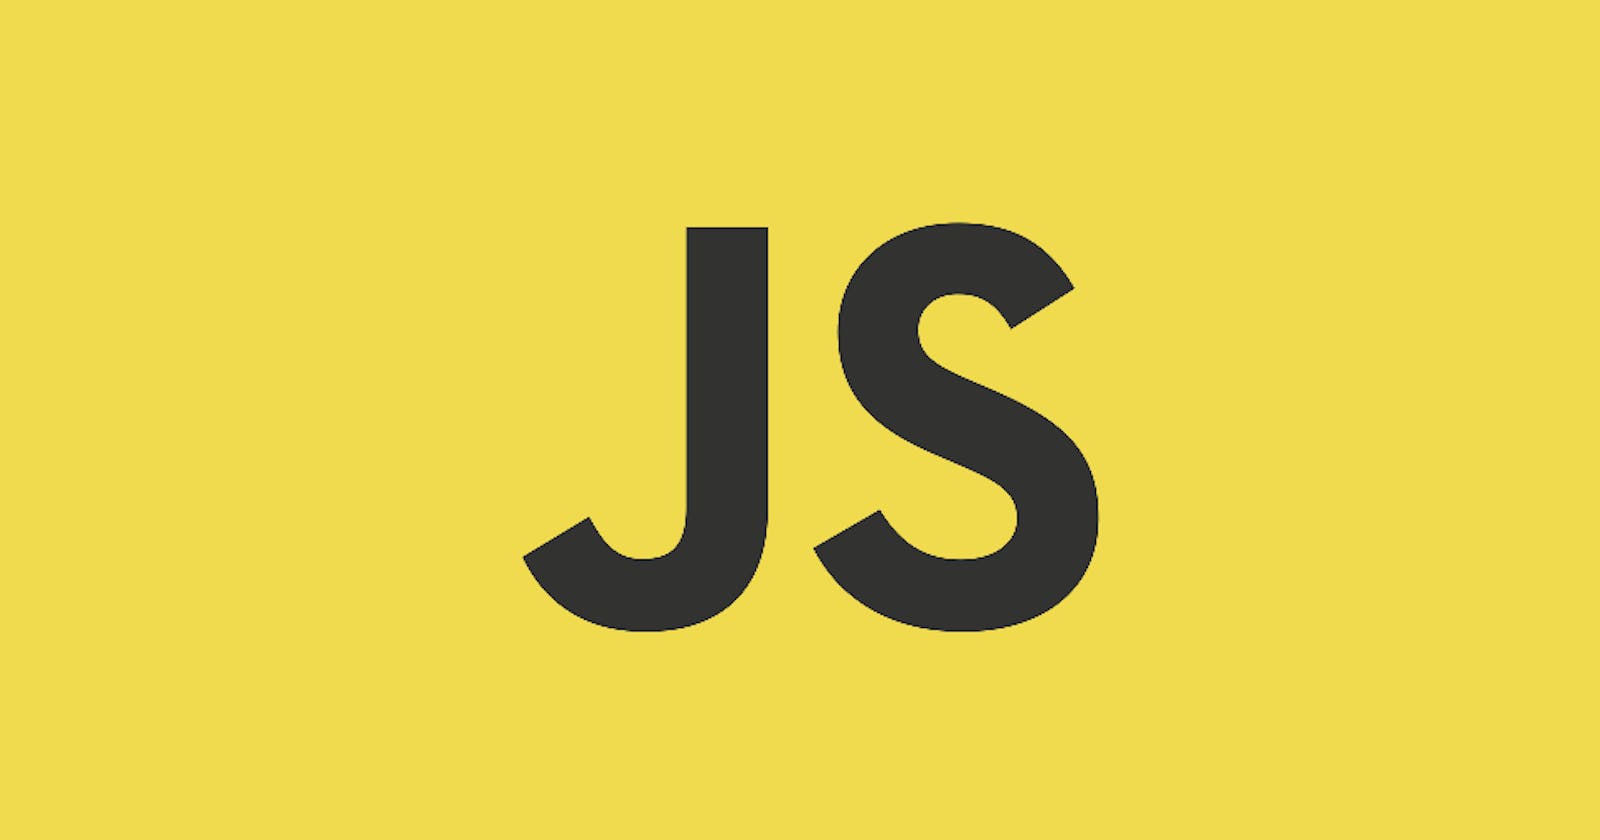 JavaScript for...in loop Explained